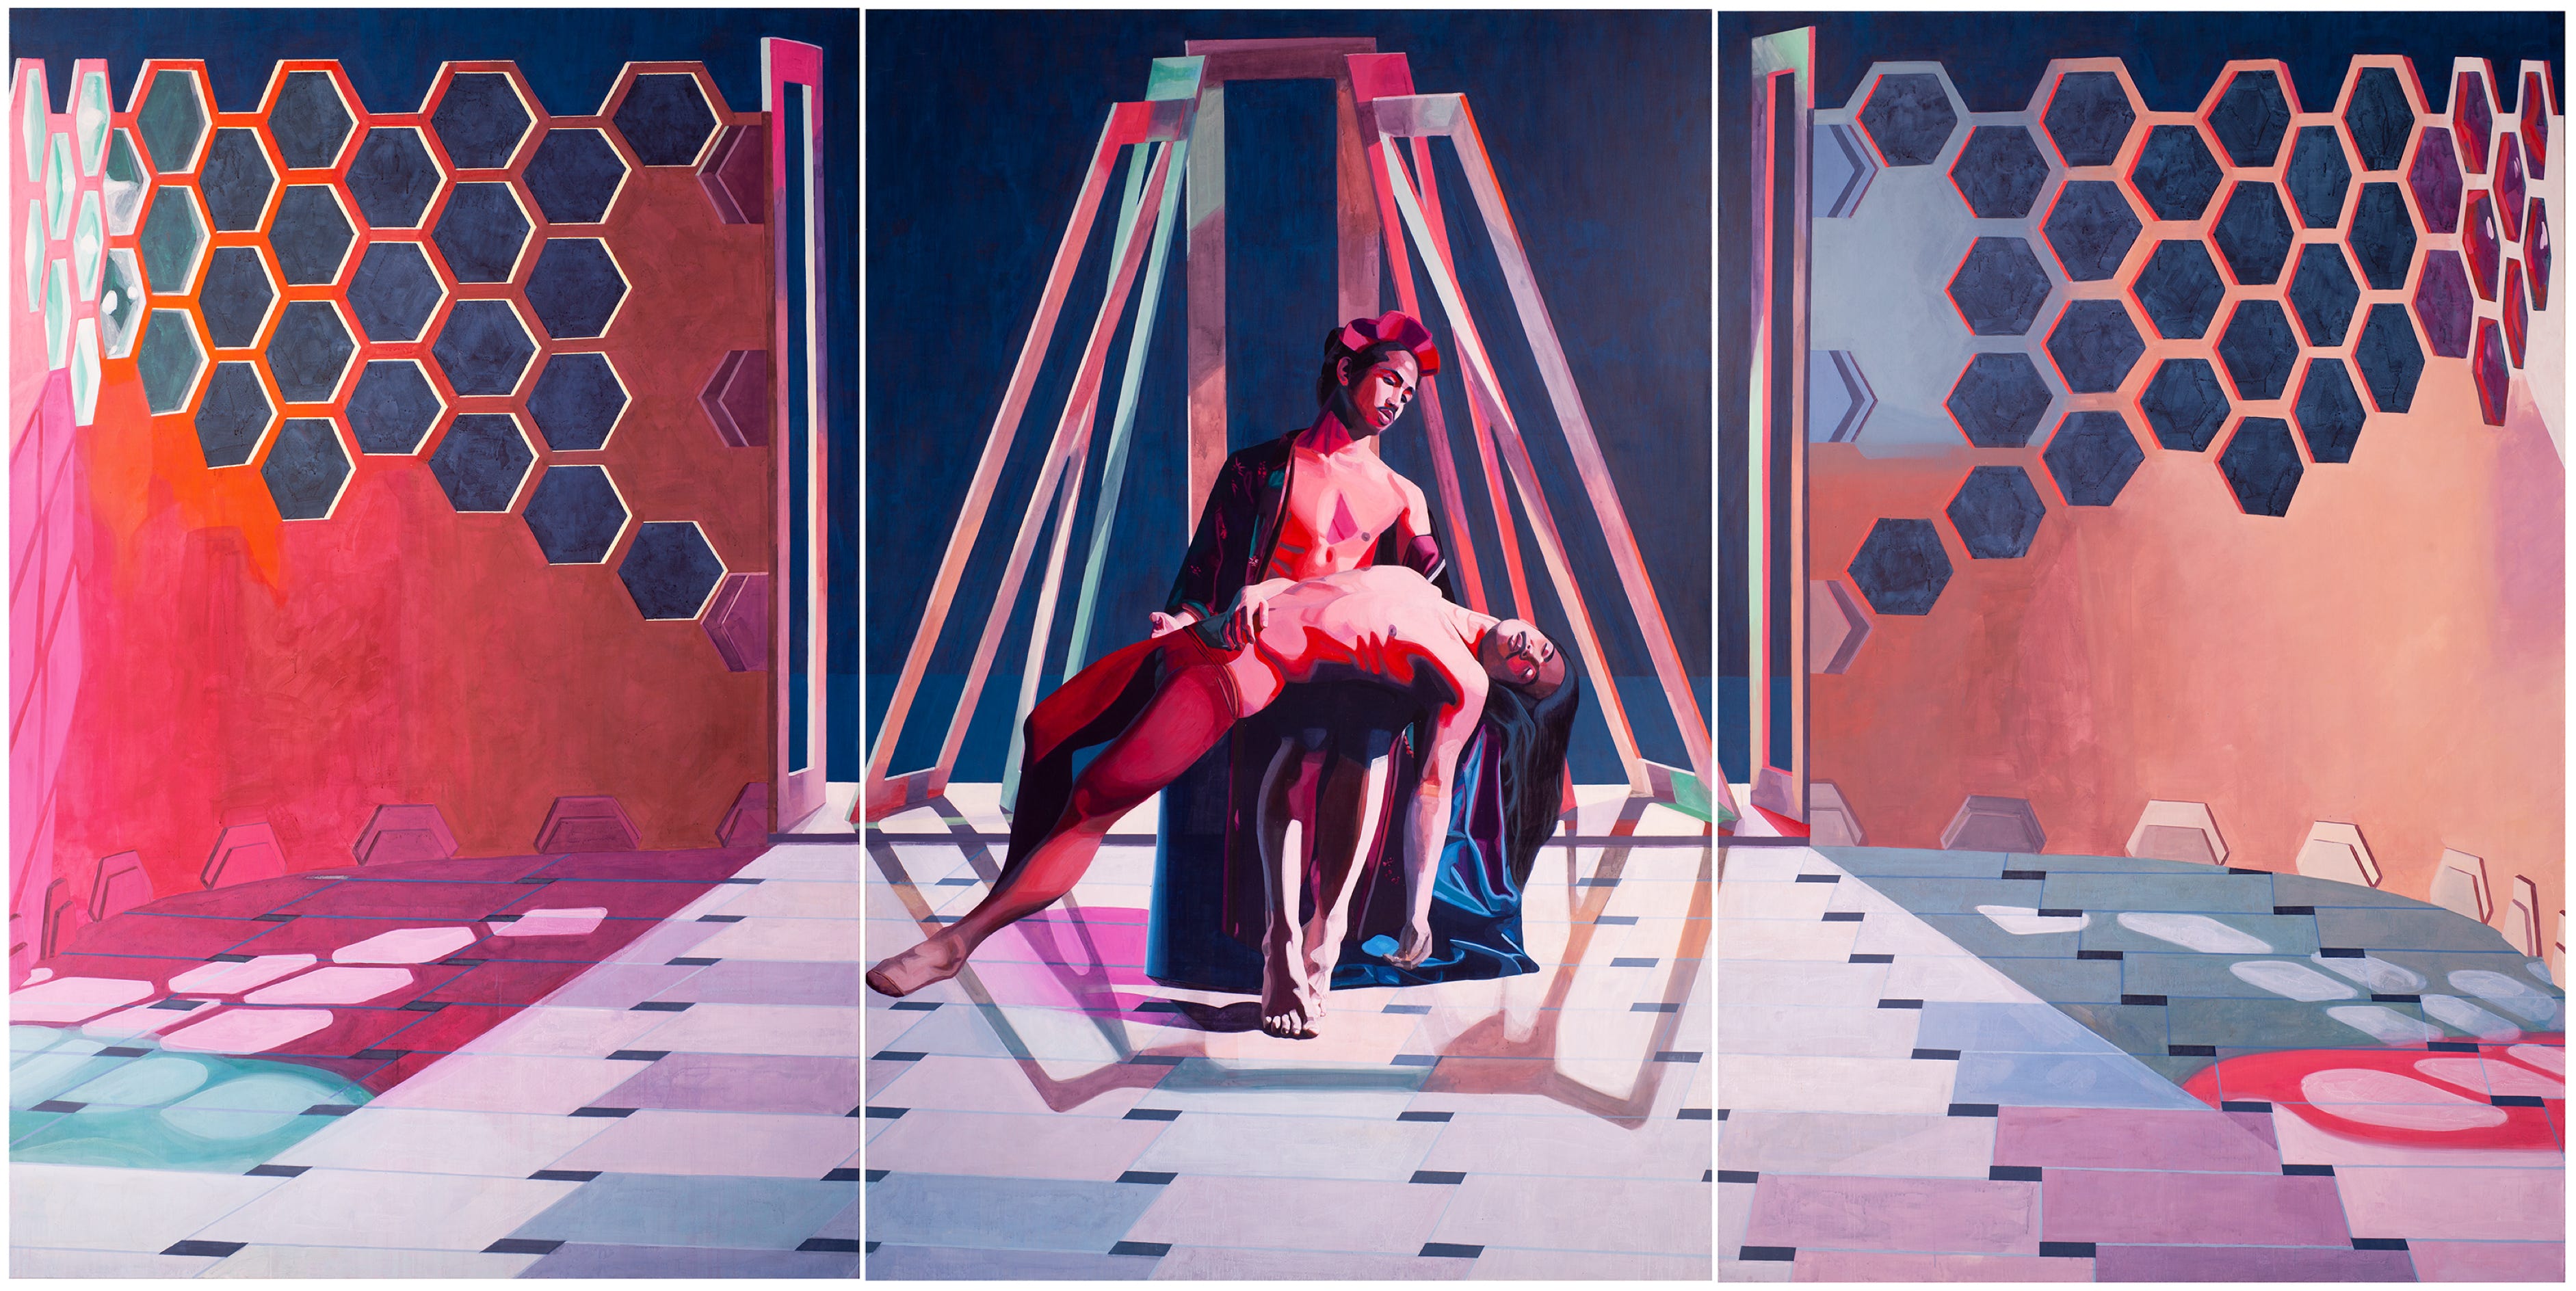 'Welcome to the Pleasuredome' painting Seppe De Roo 2019 300 x 600 cm